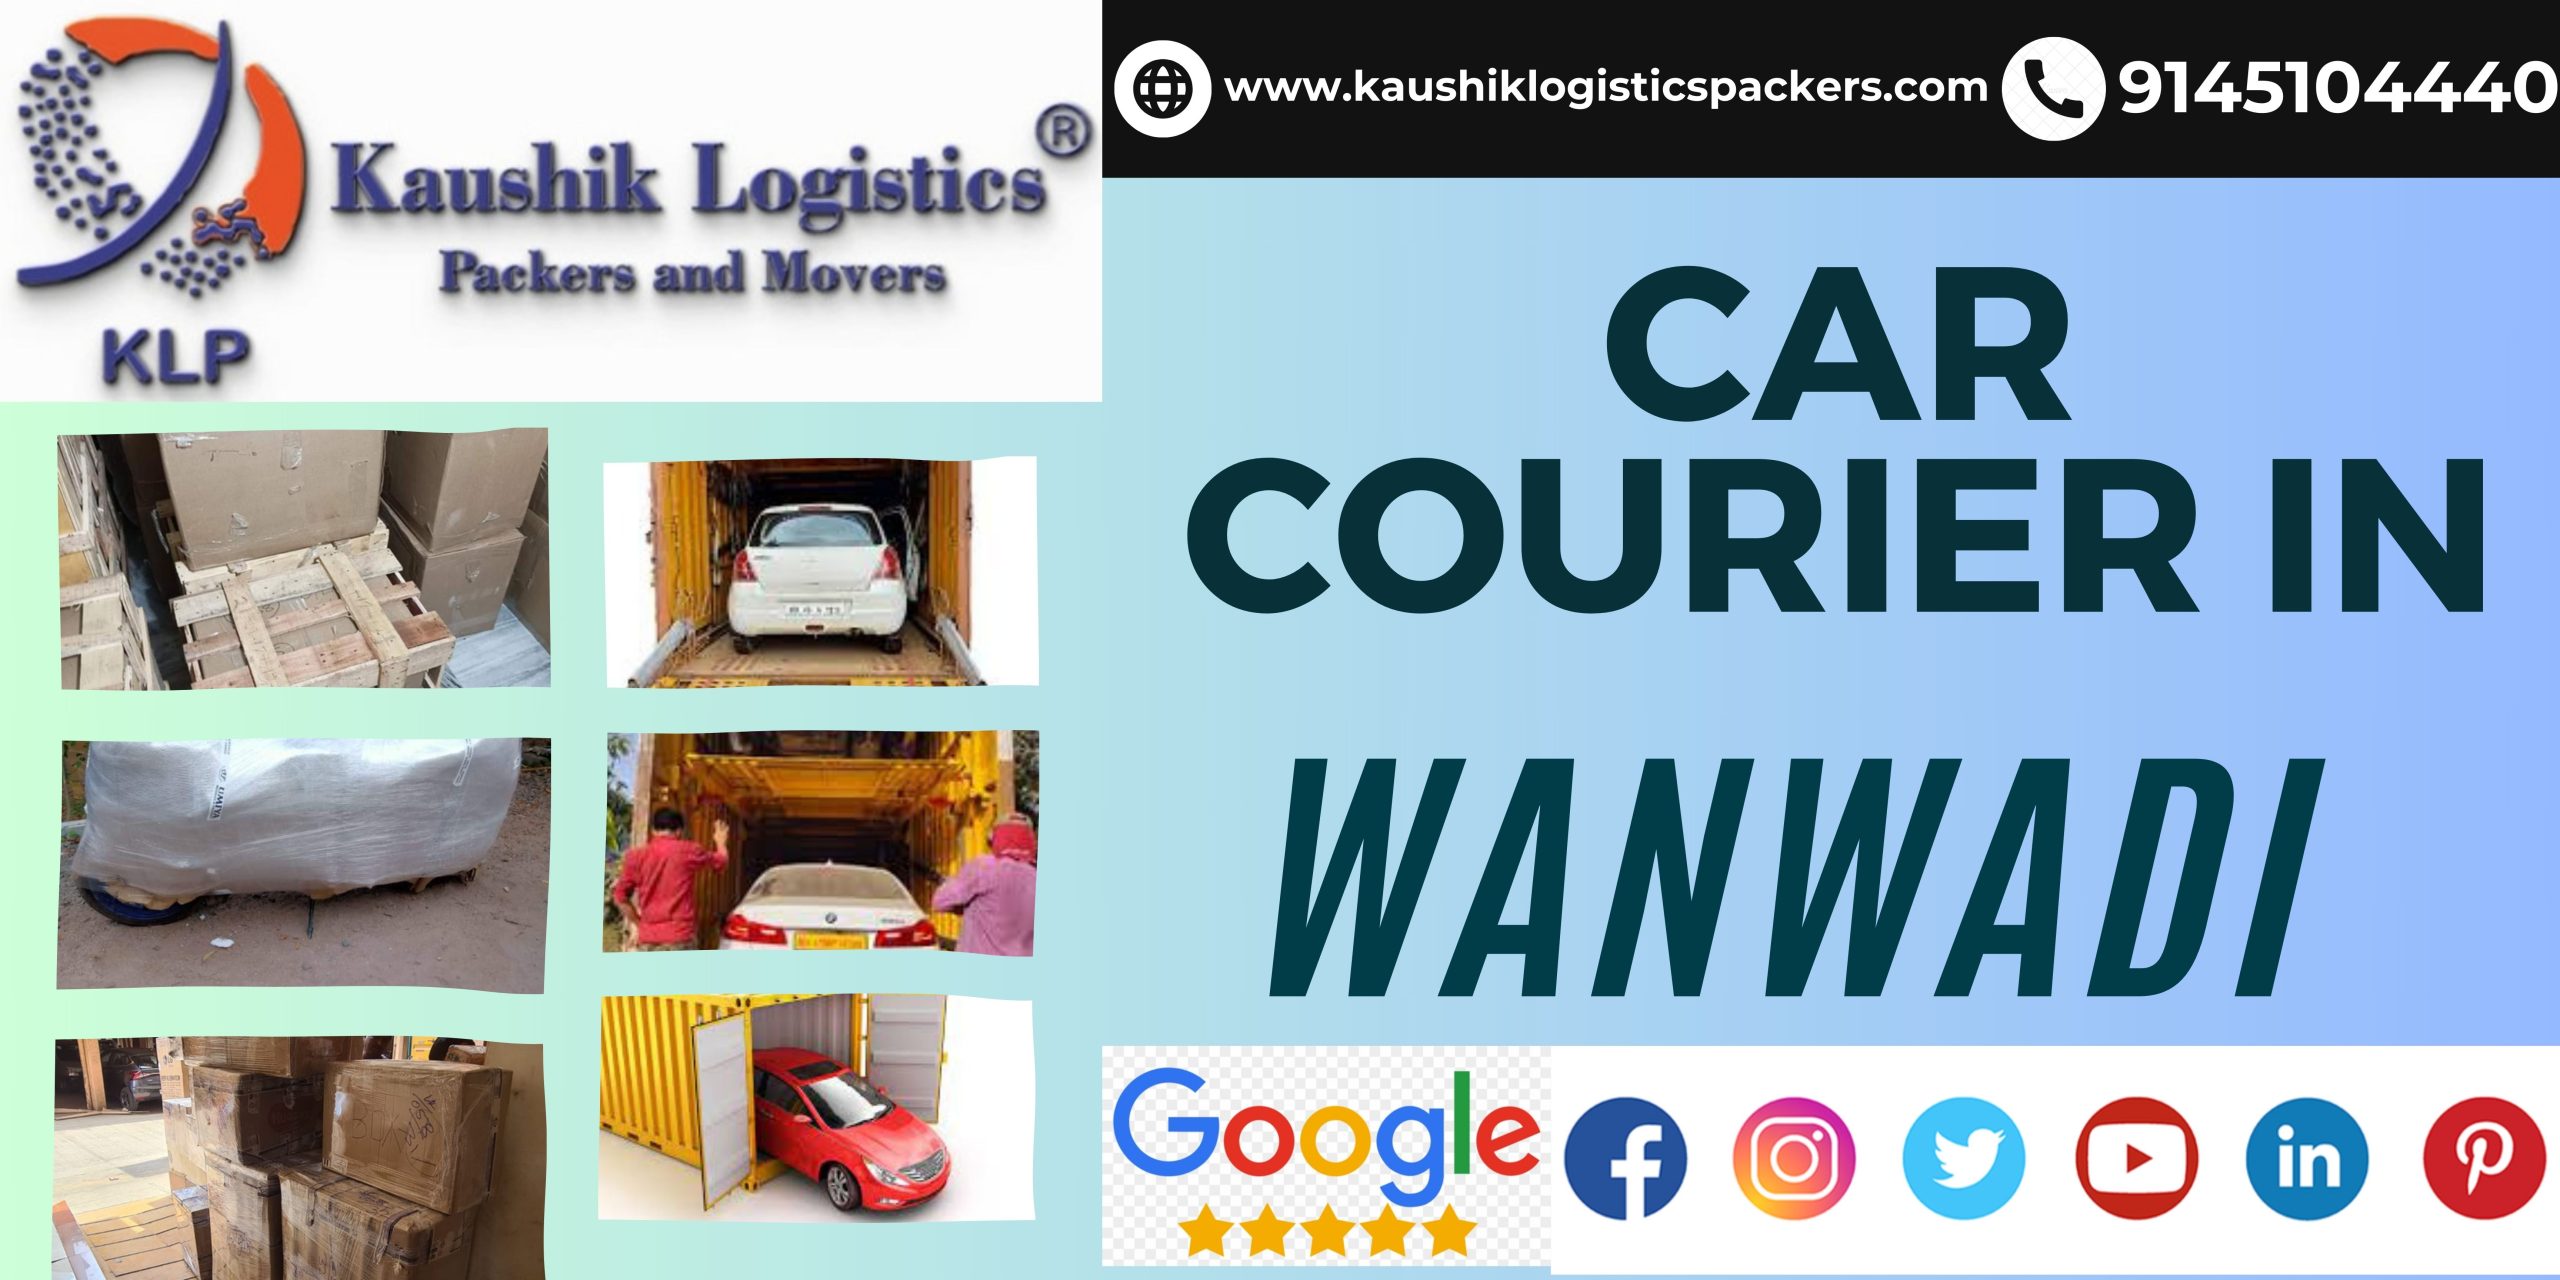 Packers and Movers In Wanwadi